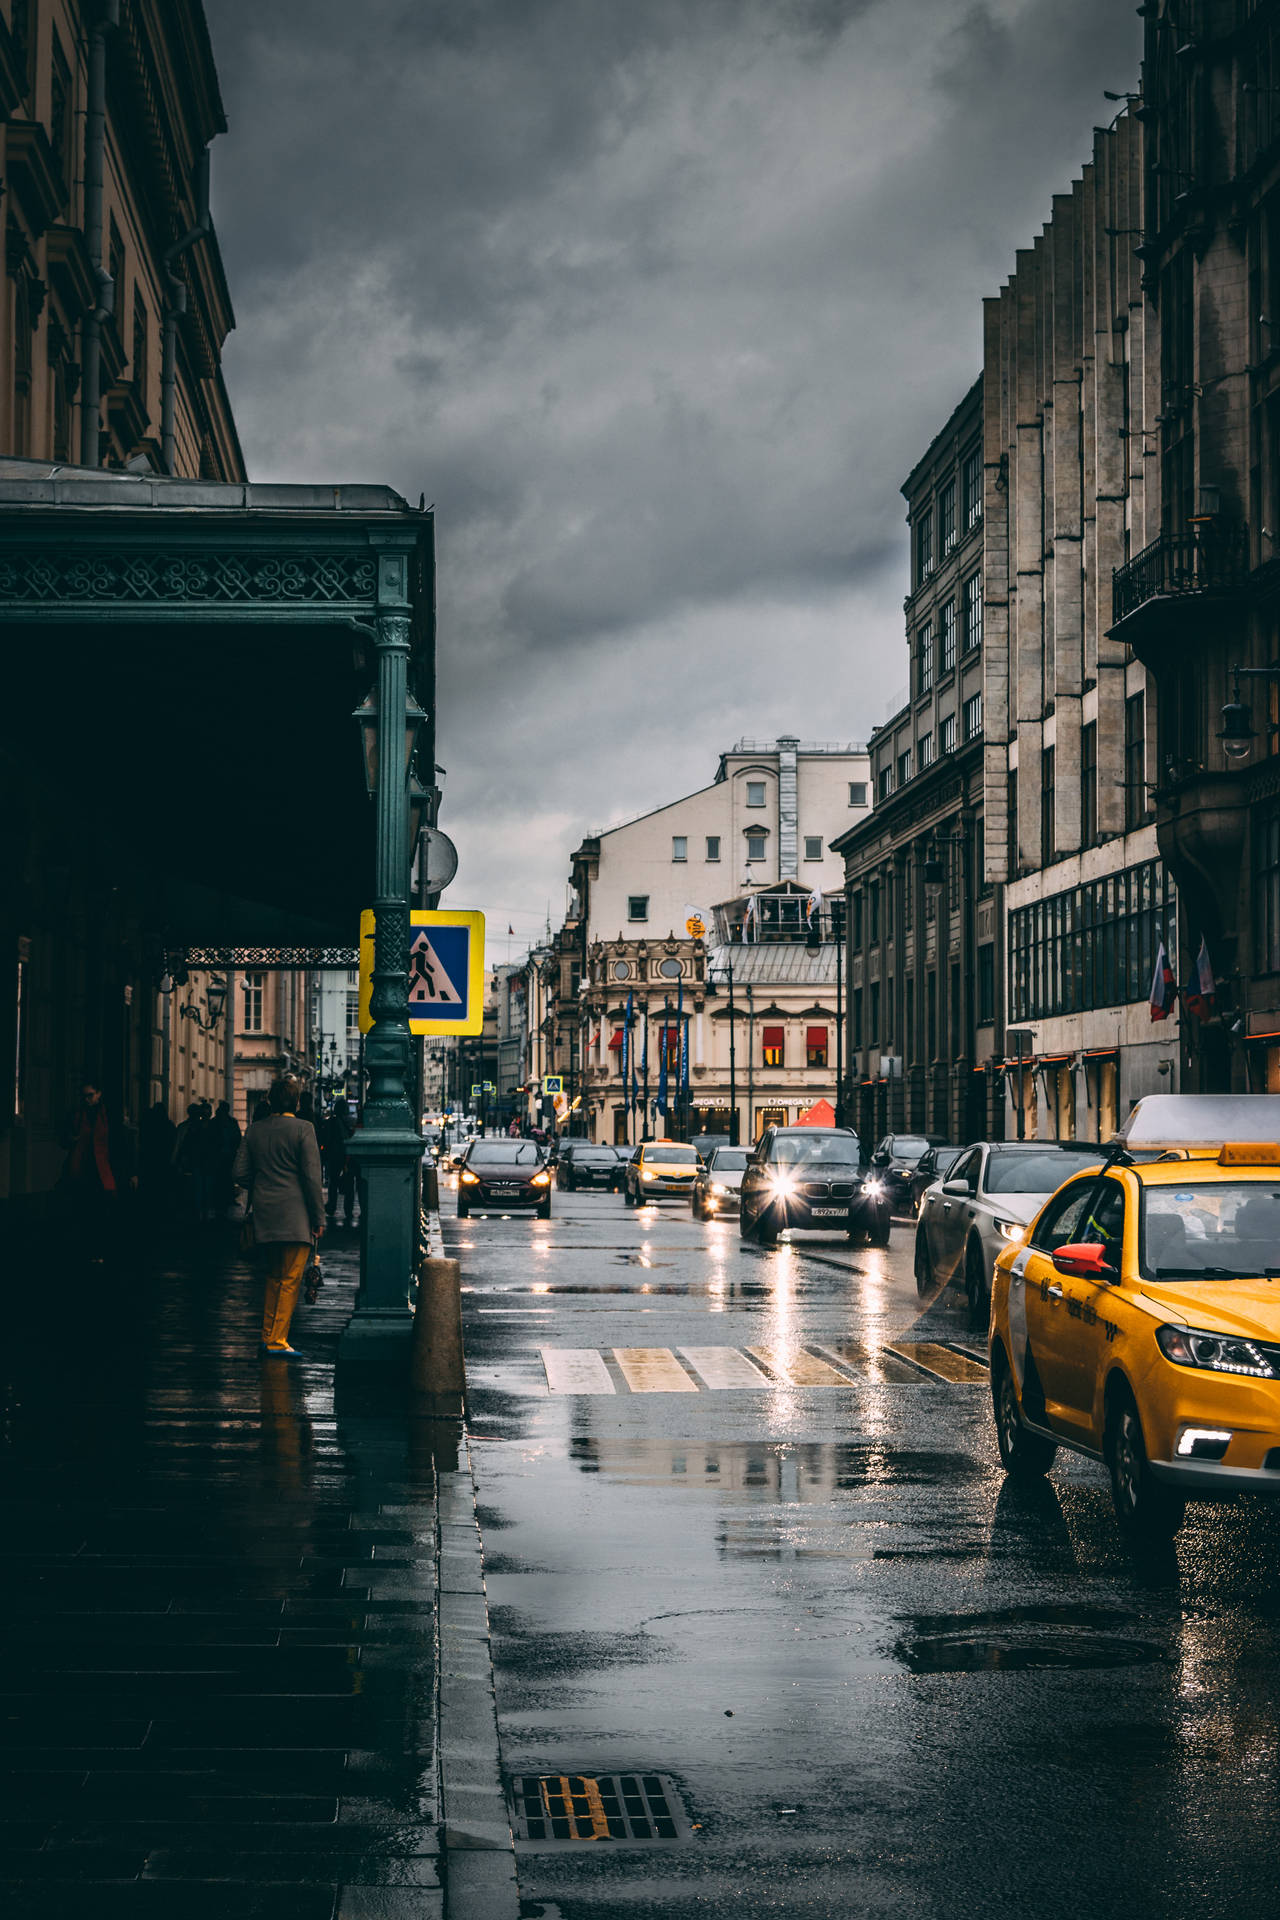 Just another wet and gloomy day in the city streets Wallpaper